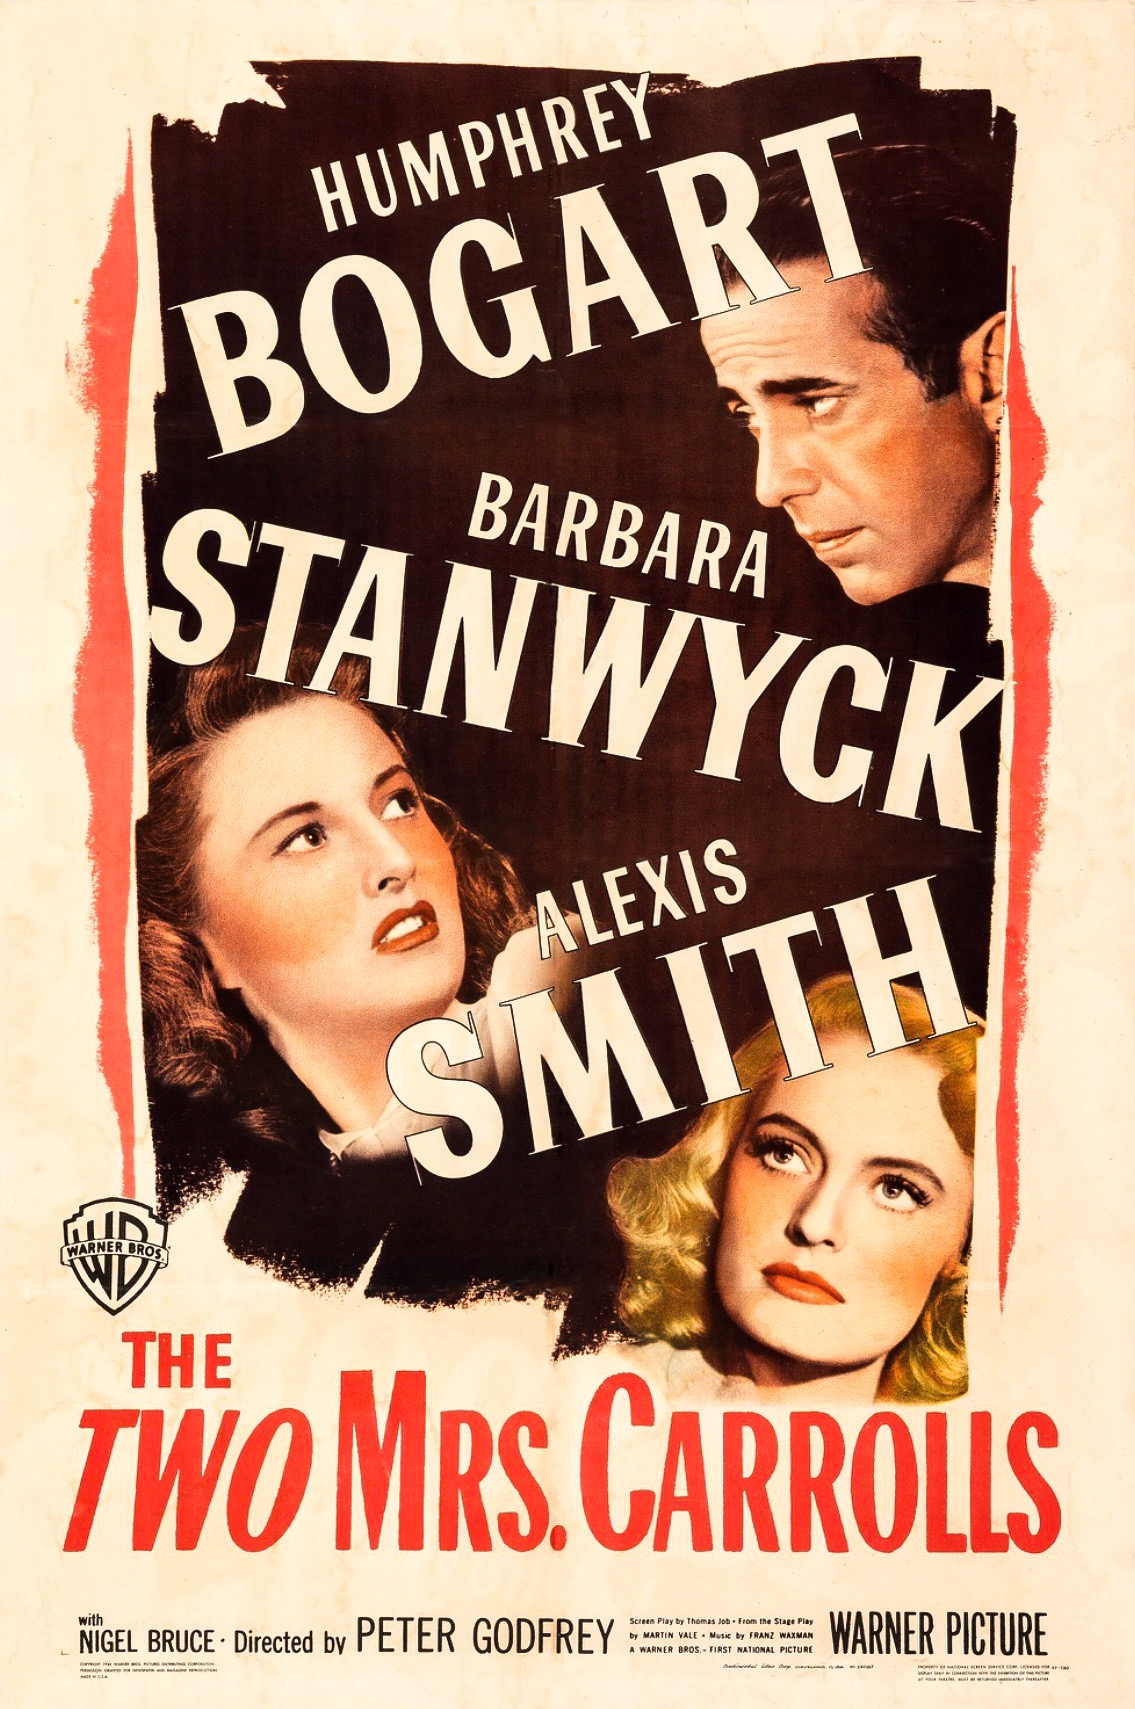 THE TWO MRS. CARROLLS (1947)